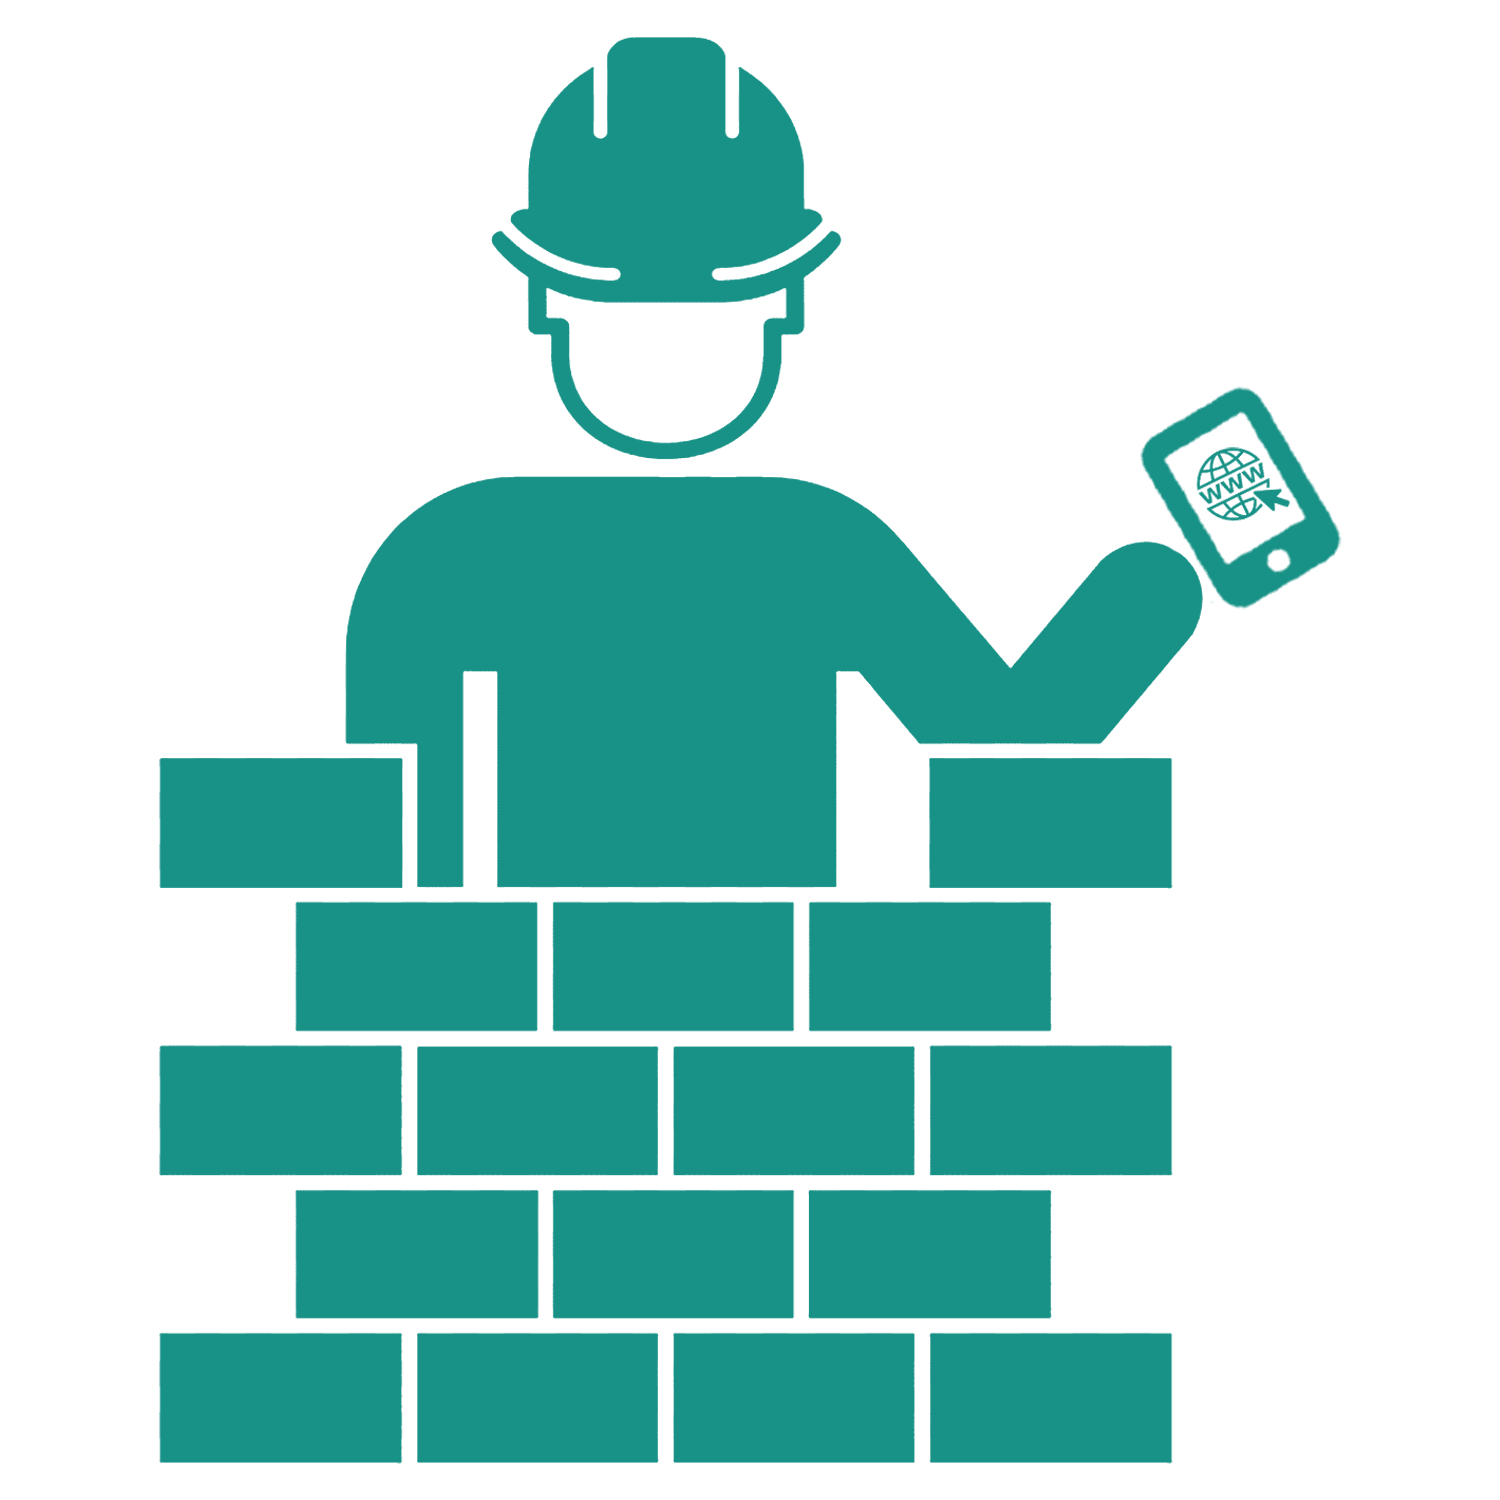 Web Accessibility for Construction Industry